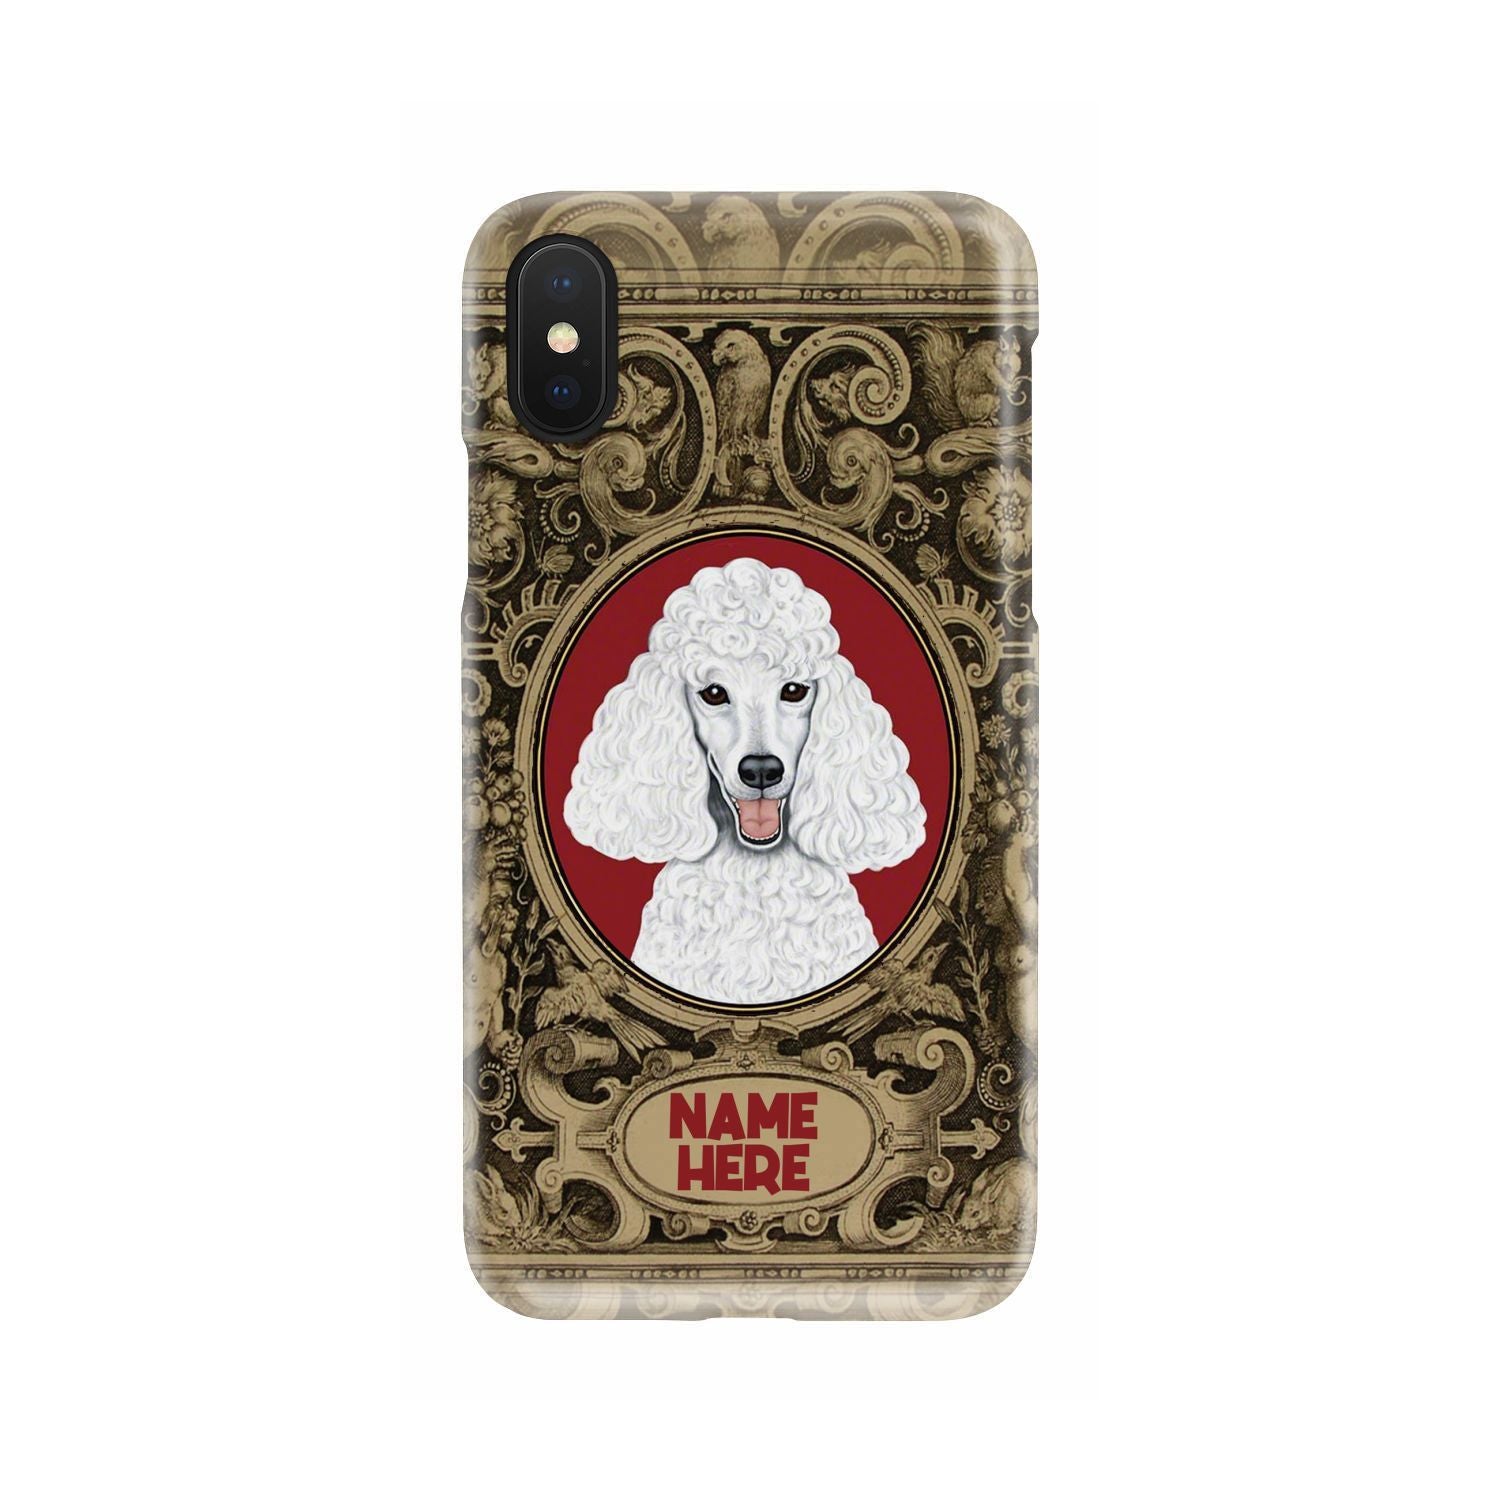 Adorable Poodle Custom Name Phone Case